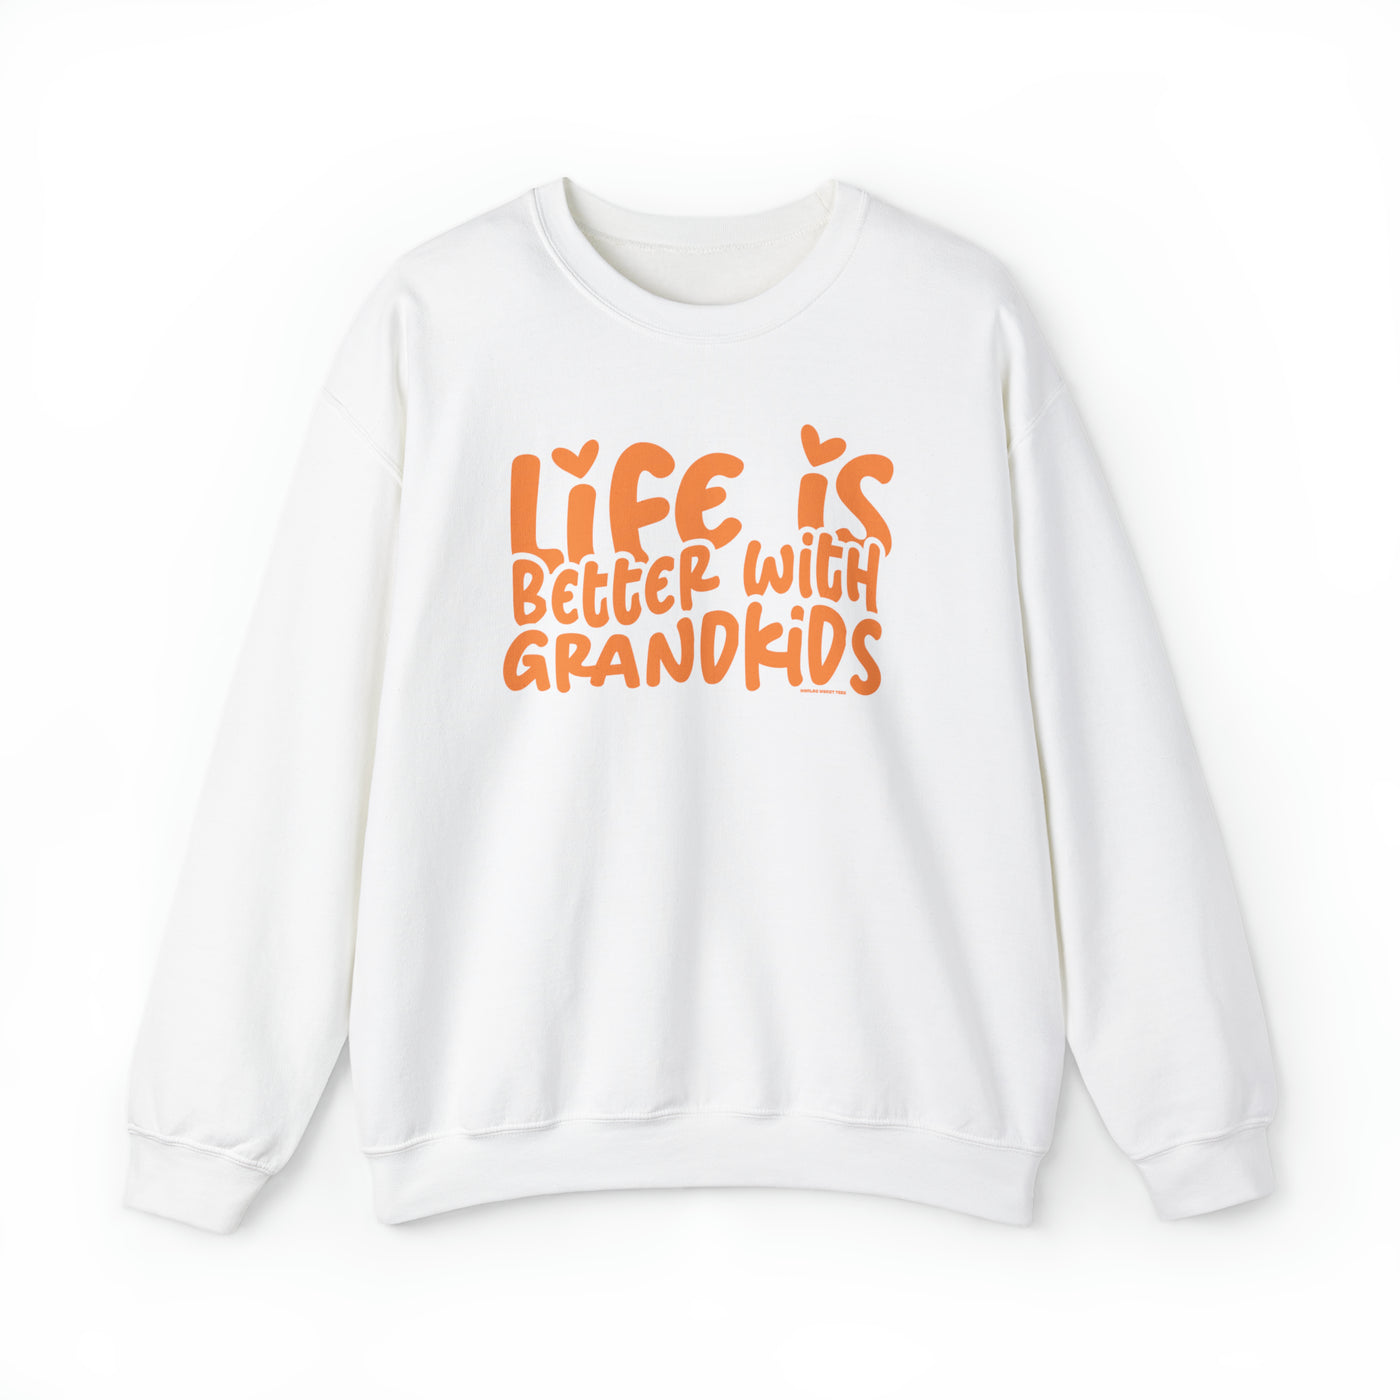 Life is Better With Grandkids Crew